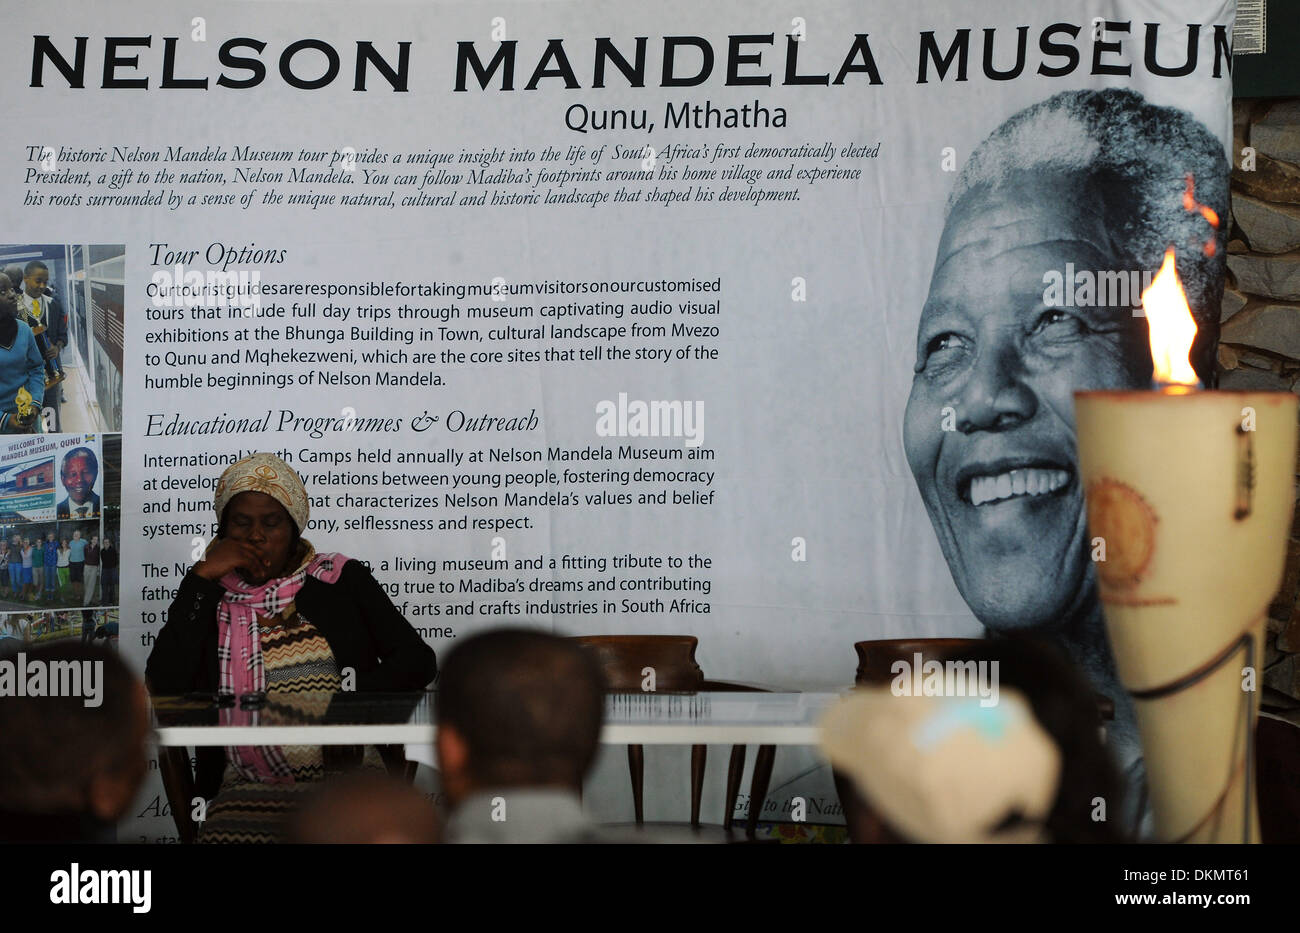 QUNU, SOUTH AFRICA: The Neslon Mandela Museum held a ceremony honouring former President Nelson Mandela on December 7, 2013 in Qunu, South Africa. The Father of the Nation, Nelson Mandela, Tata Madiba, passed away quietly on the evening of December 5, 2013 at his home in Houghton with family. Credit:  Gallo images/Alamy Live News Stock Photo